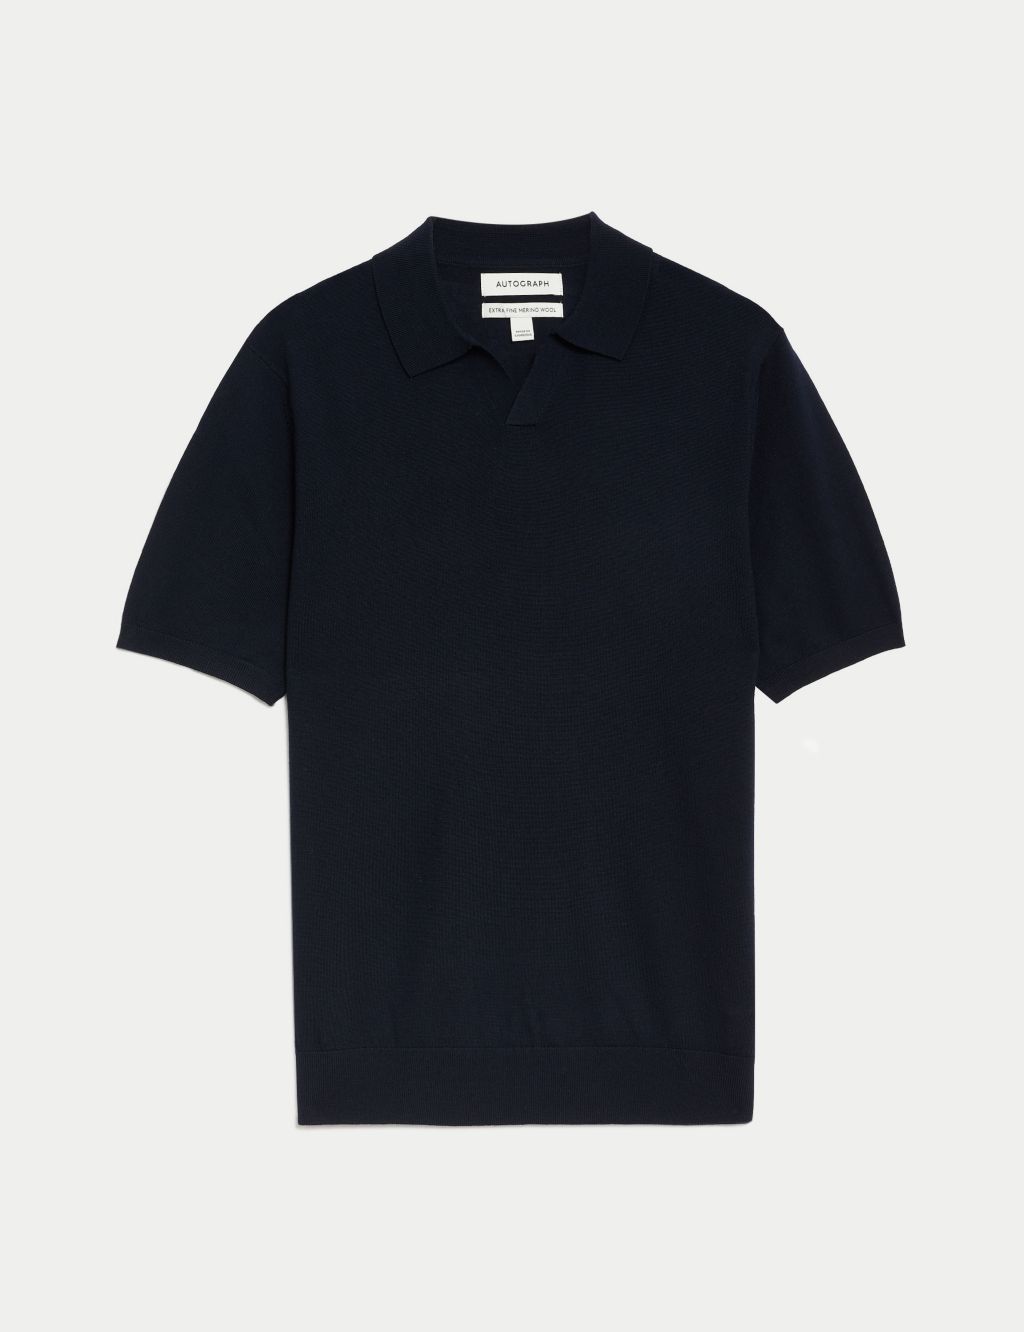 Pure Extra Fine Merino Wool Knitted Polo Shirt image 2